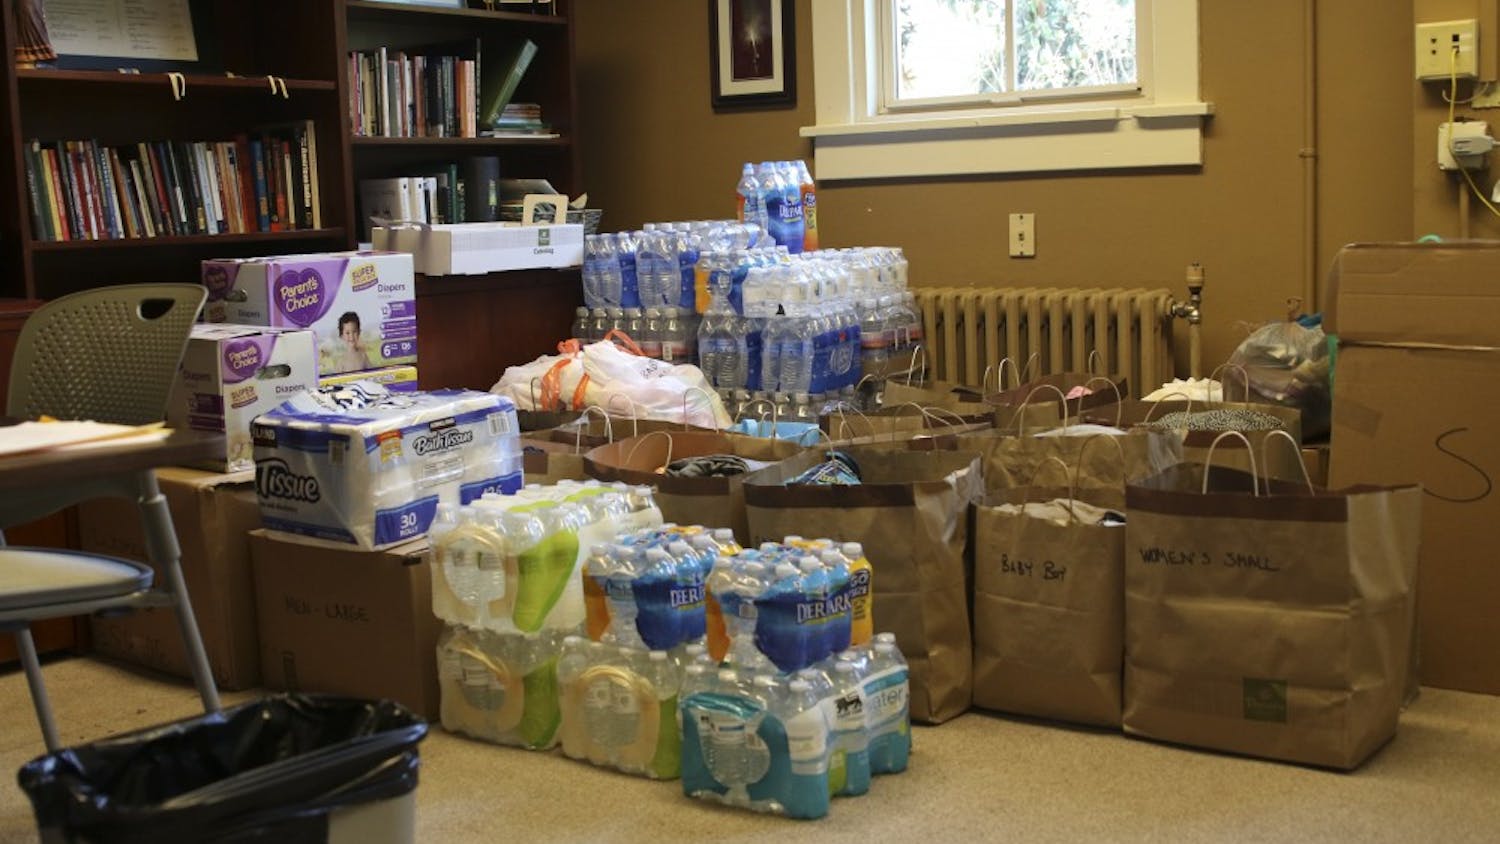 Abernethy Hall is collecting supplies for Hurricane Matthew relief efforts